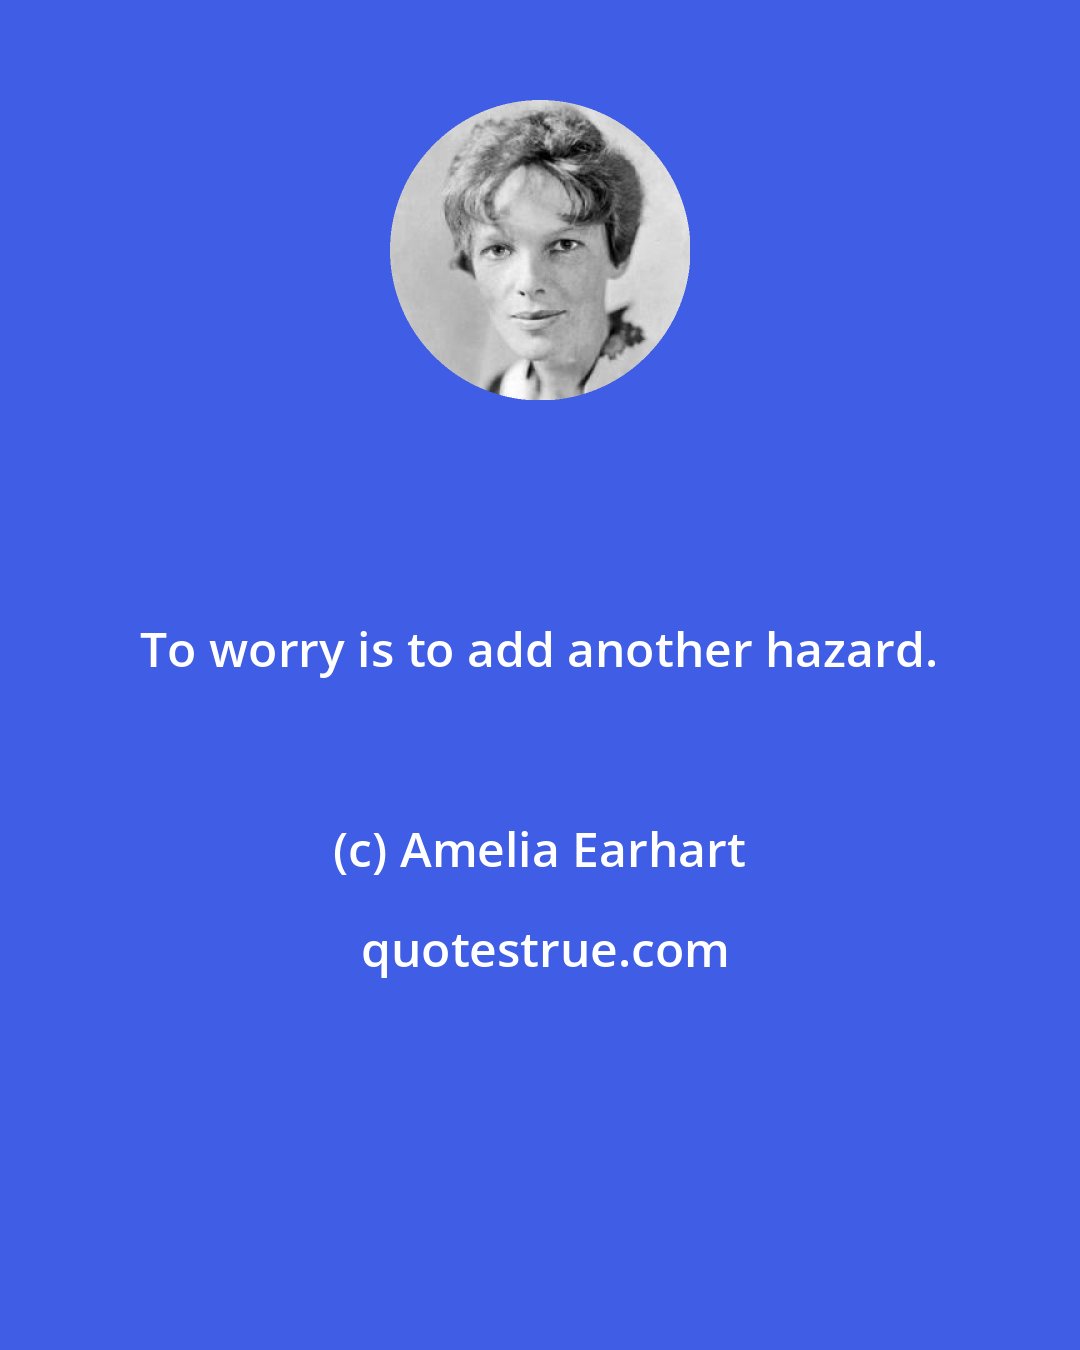 Amelia Earhart: To worry is to add another hazard.